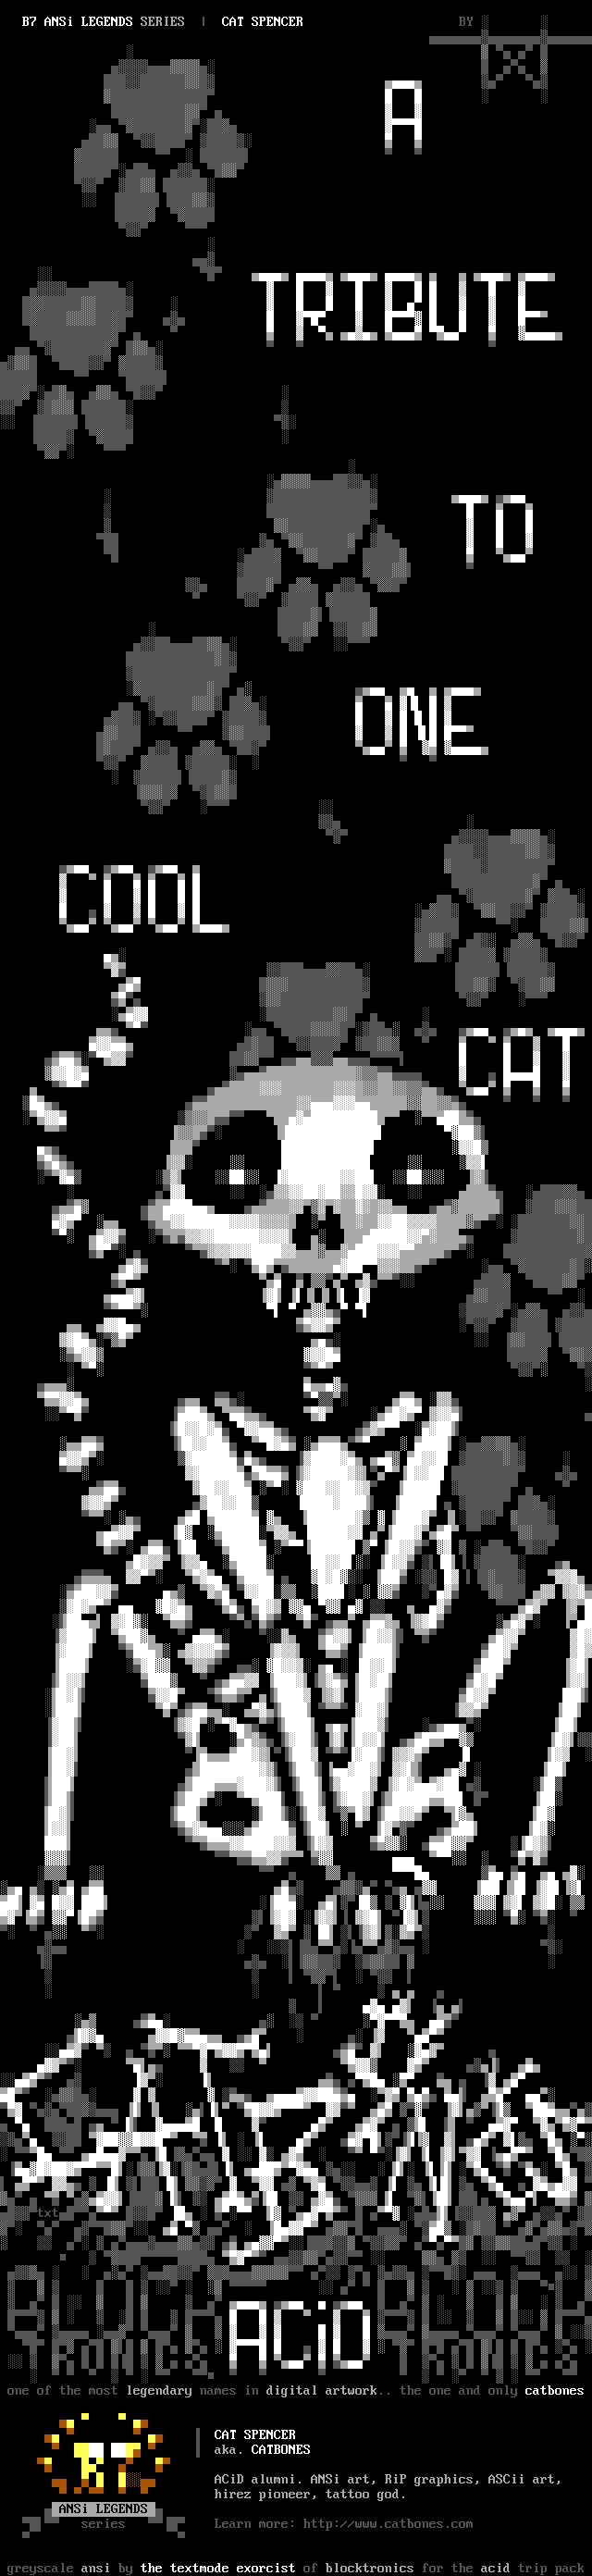 ANSi Legends: Catbones Tribute by the textorcist